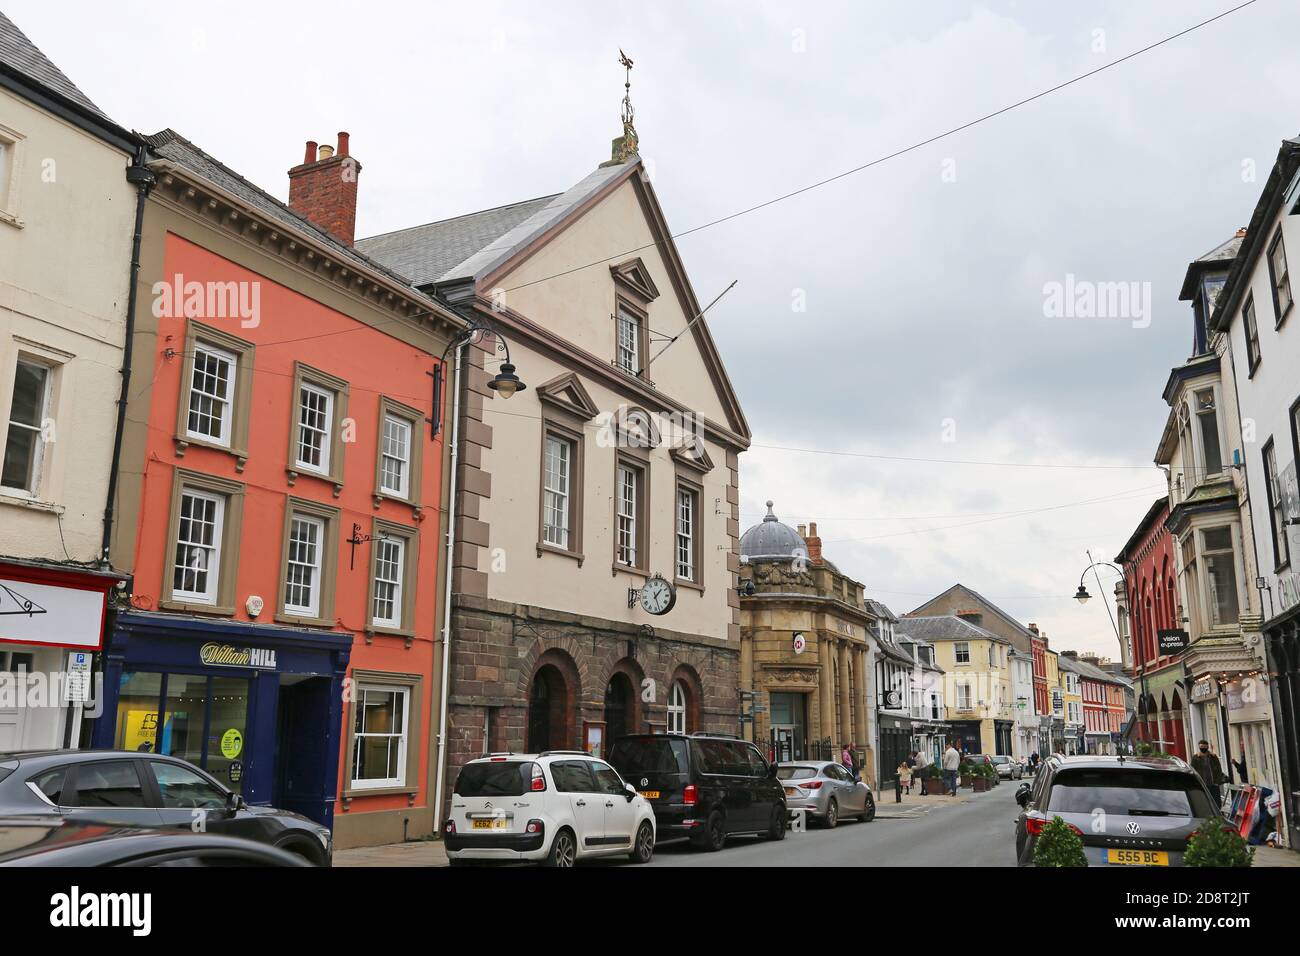 Guildhall, High Street, Brecon, Brecknockshire, Powys, Wales, Great Britain, United Kingdom, UK, Europe Stock Photo